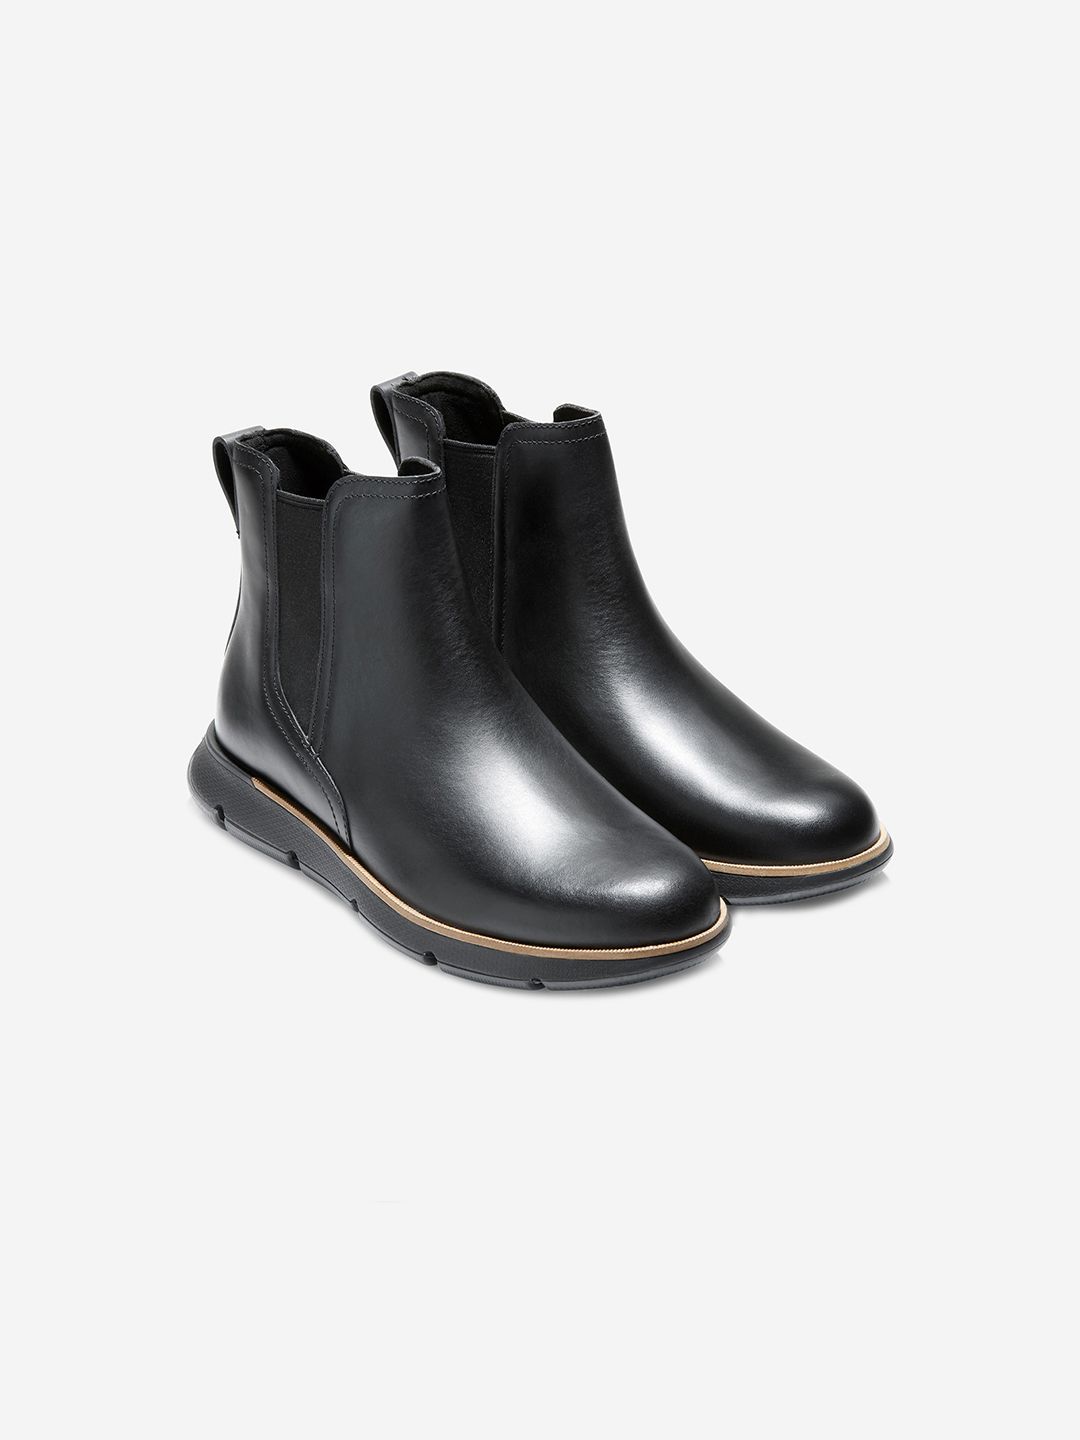 Cole Haan Women Black Leather Flat Boots Price in India